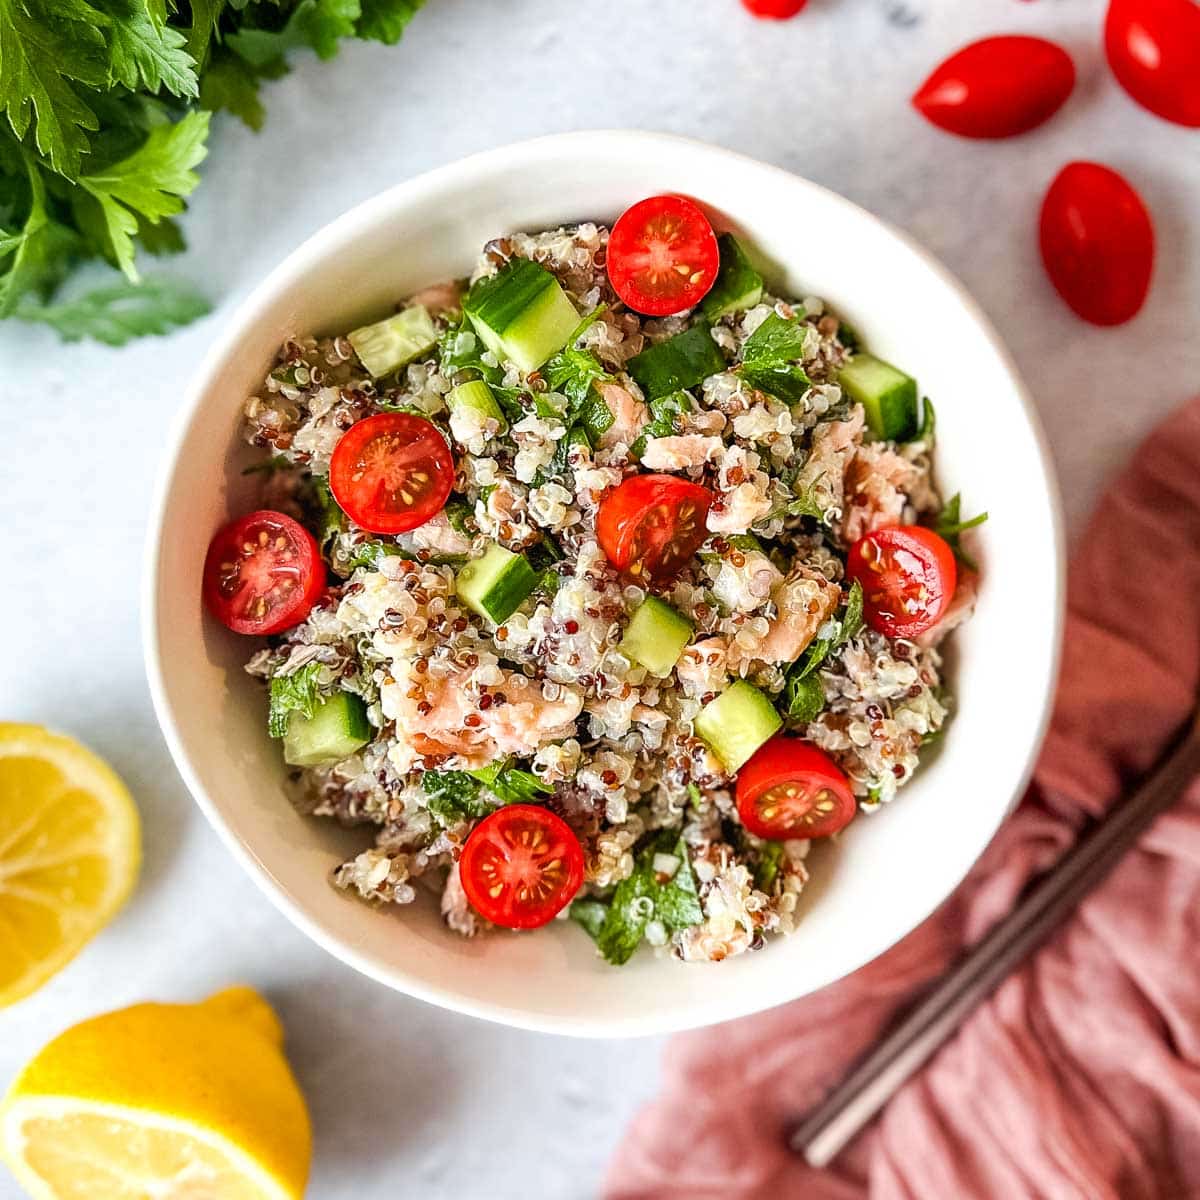 Salmon quinoa salad in a white bowl surrounded by cherry tomatoes, fresh parsley, and a cut lemon.